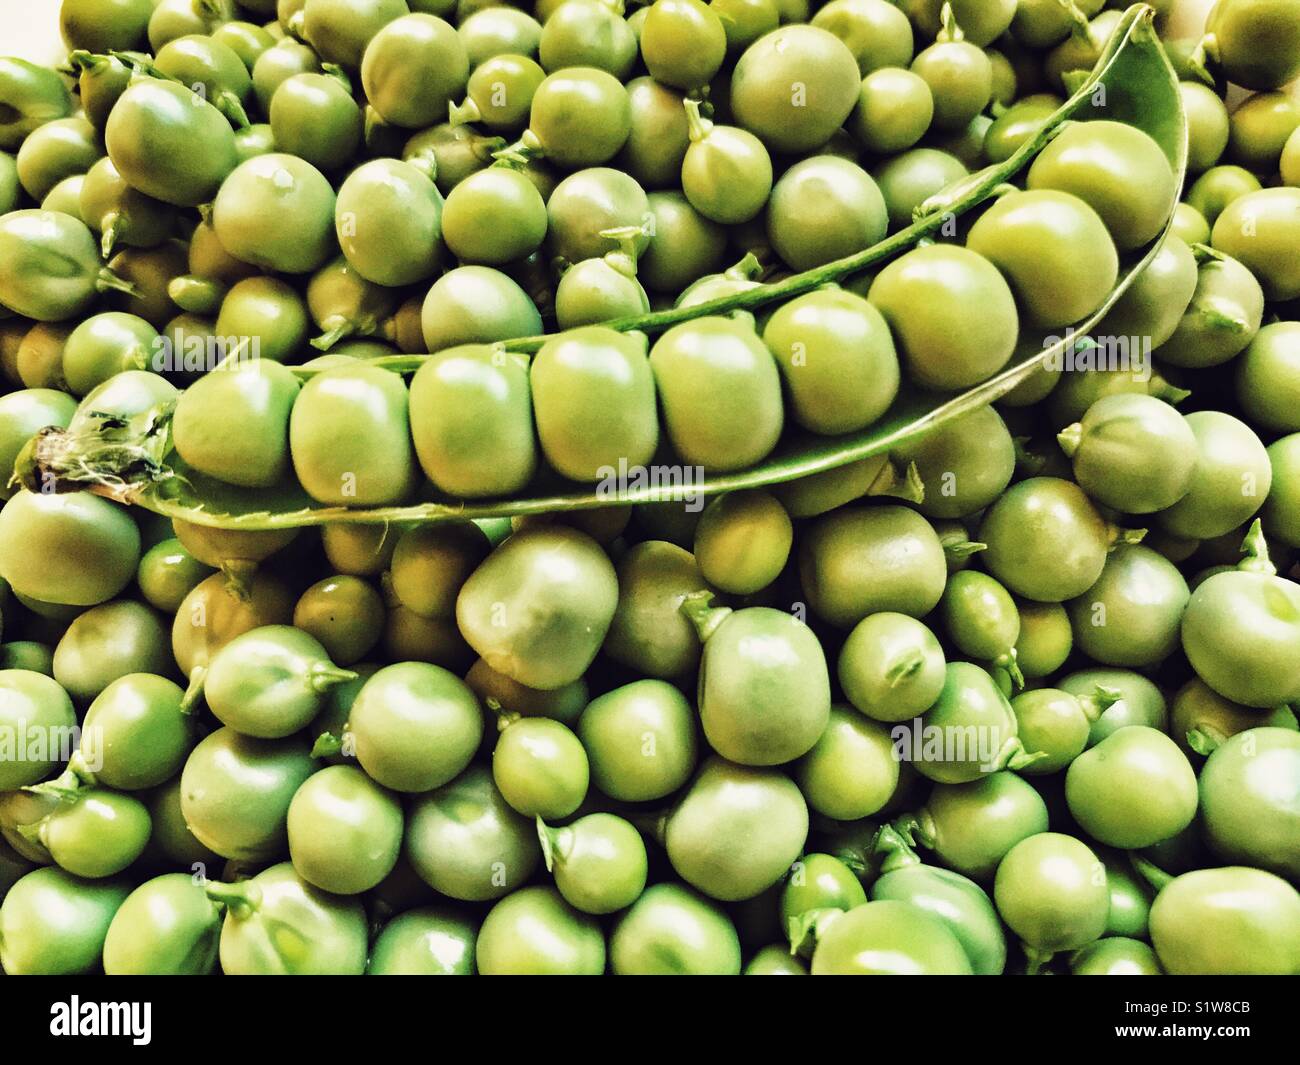 Fresh garden peas, and peas in a pod, high angle view Stock Photo